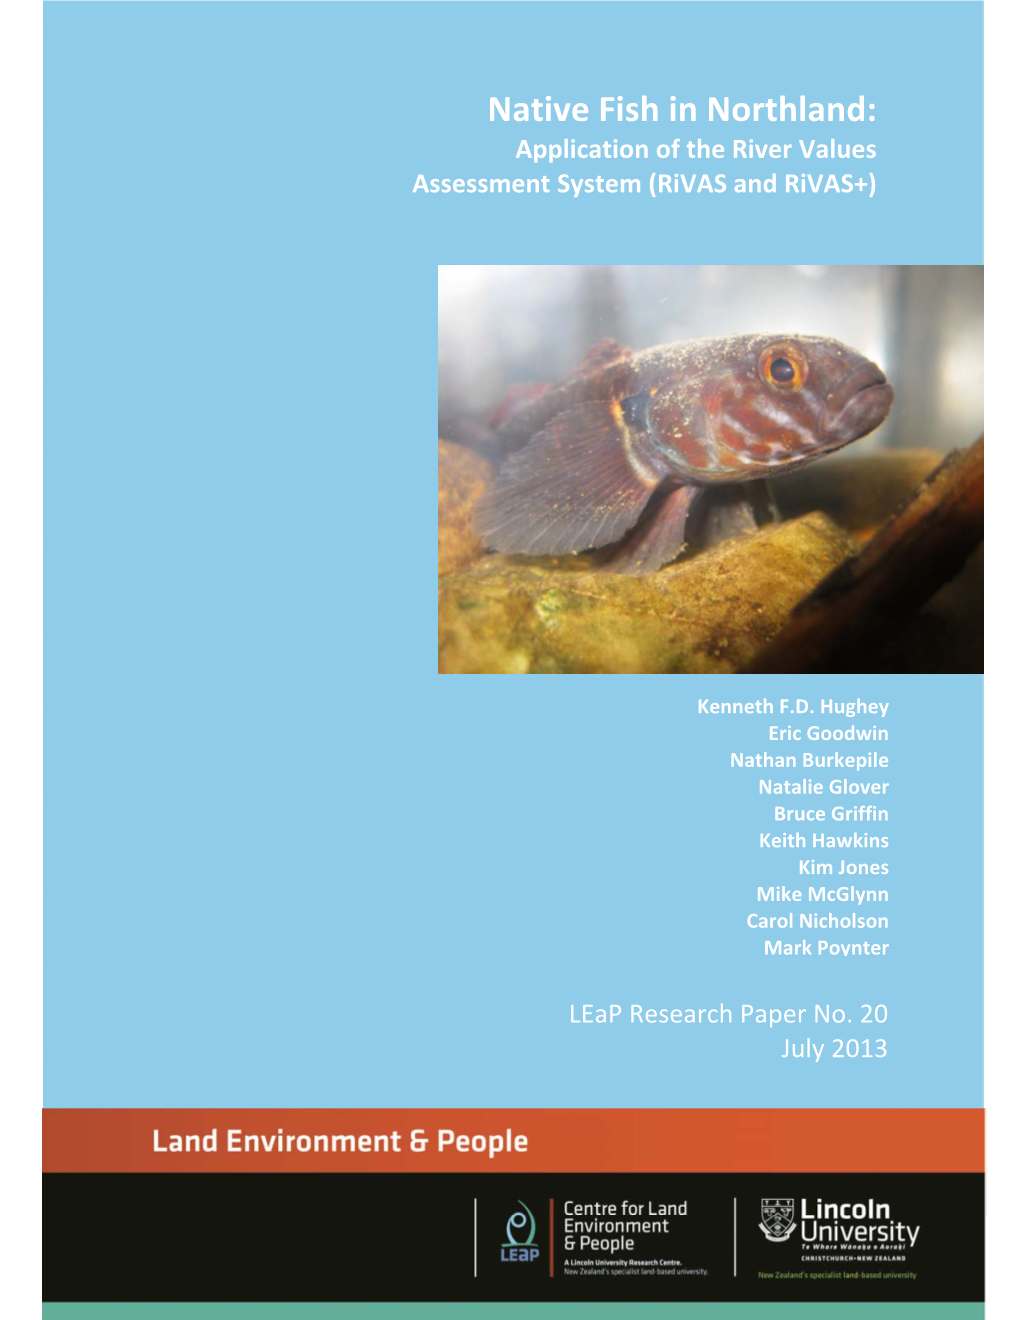 Native Fish in Northland: Application of the River Values